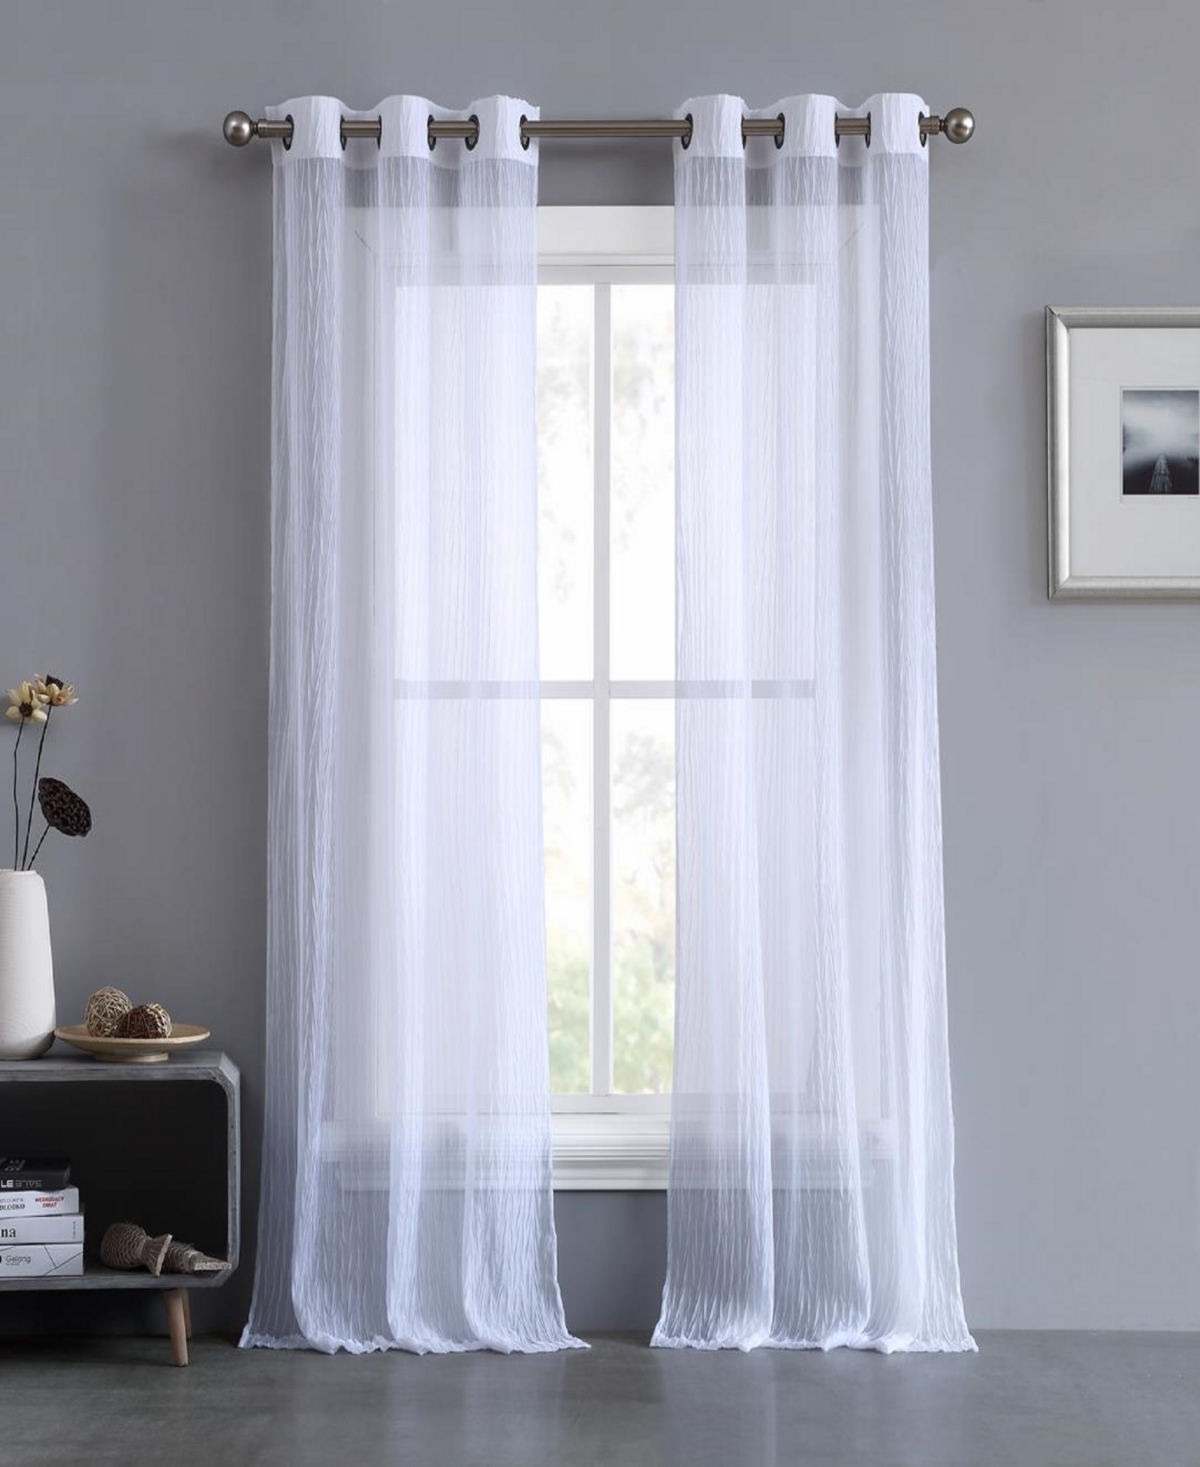 Marnie Crushed Solid Sheer Voile Grommet Window Curtain Panel Set, 38" x 84" - Light Gray